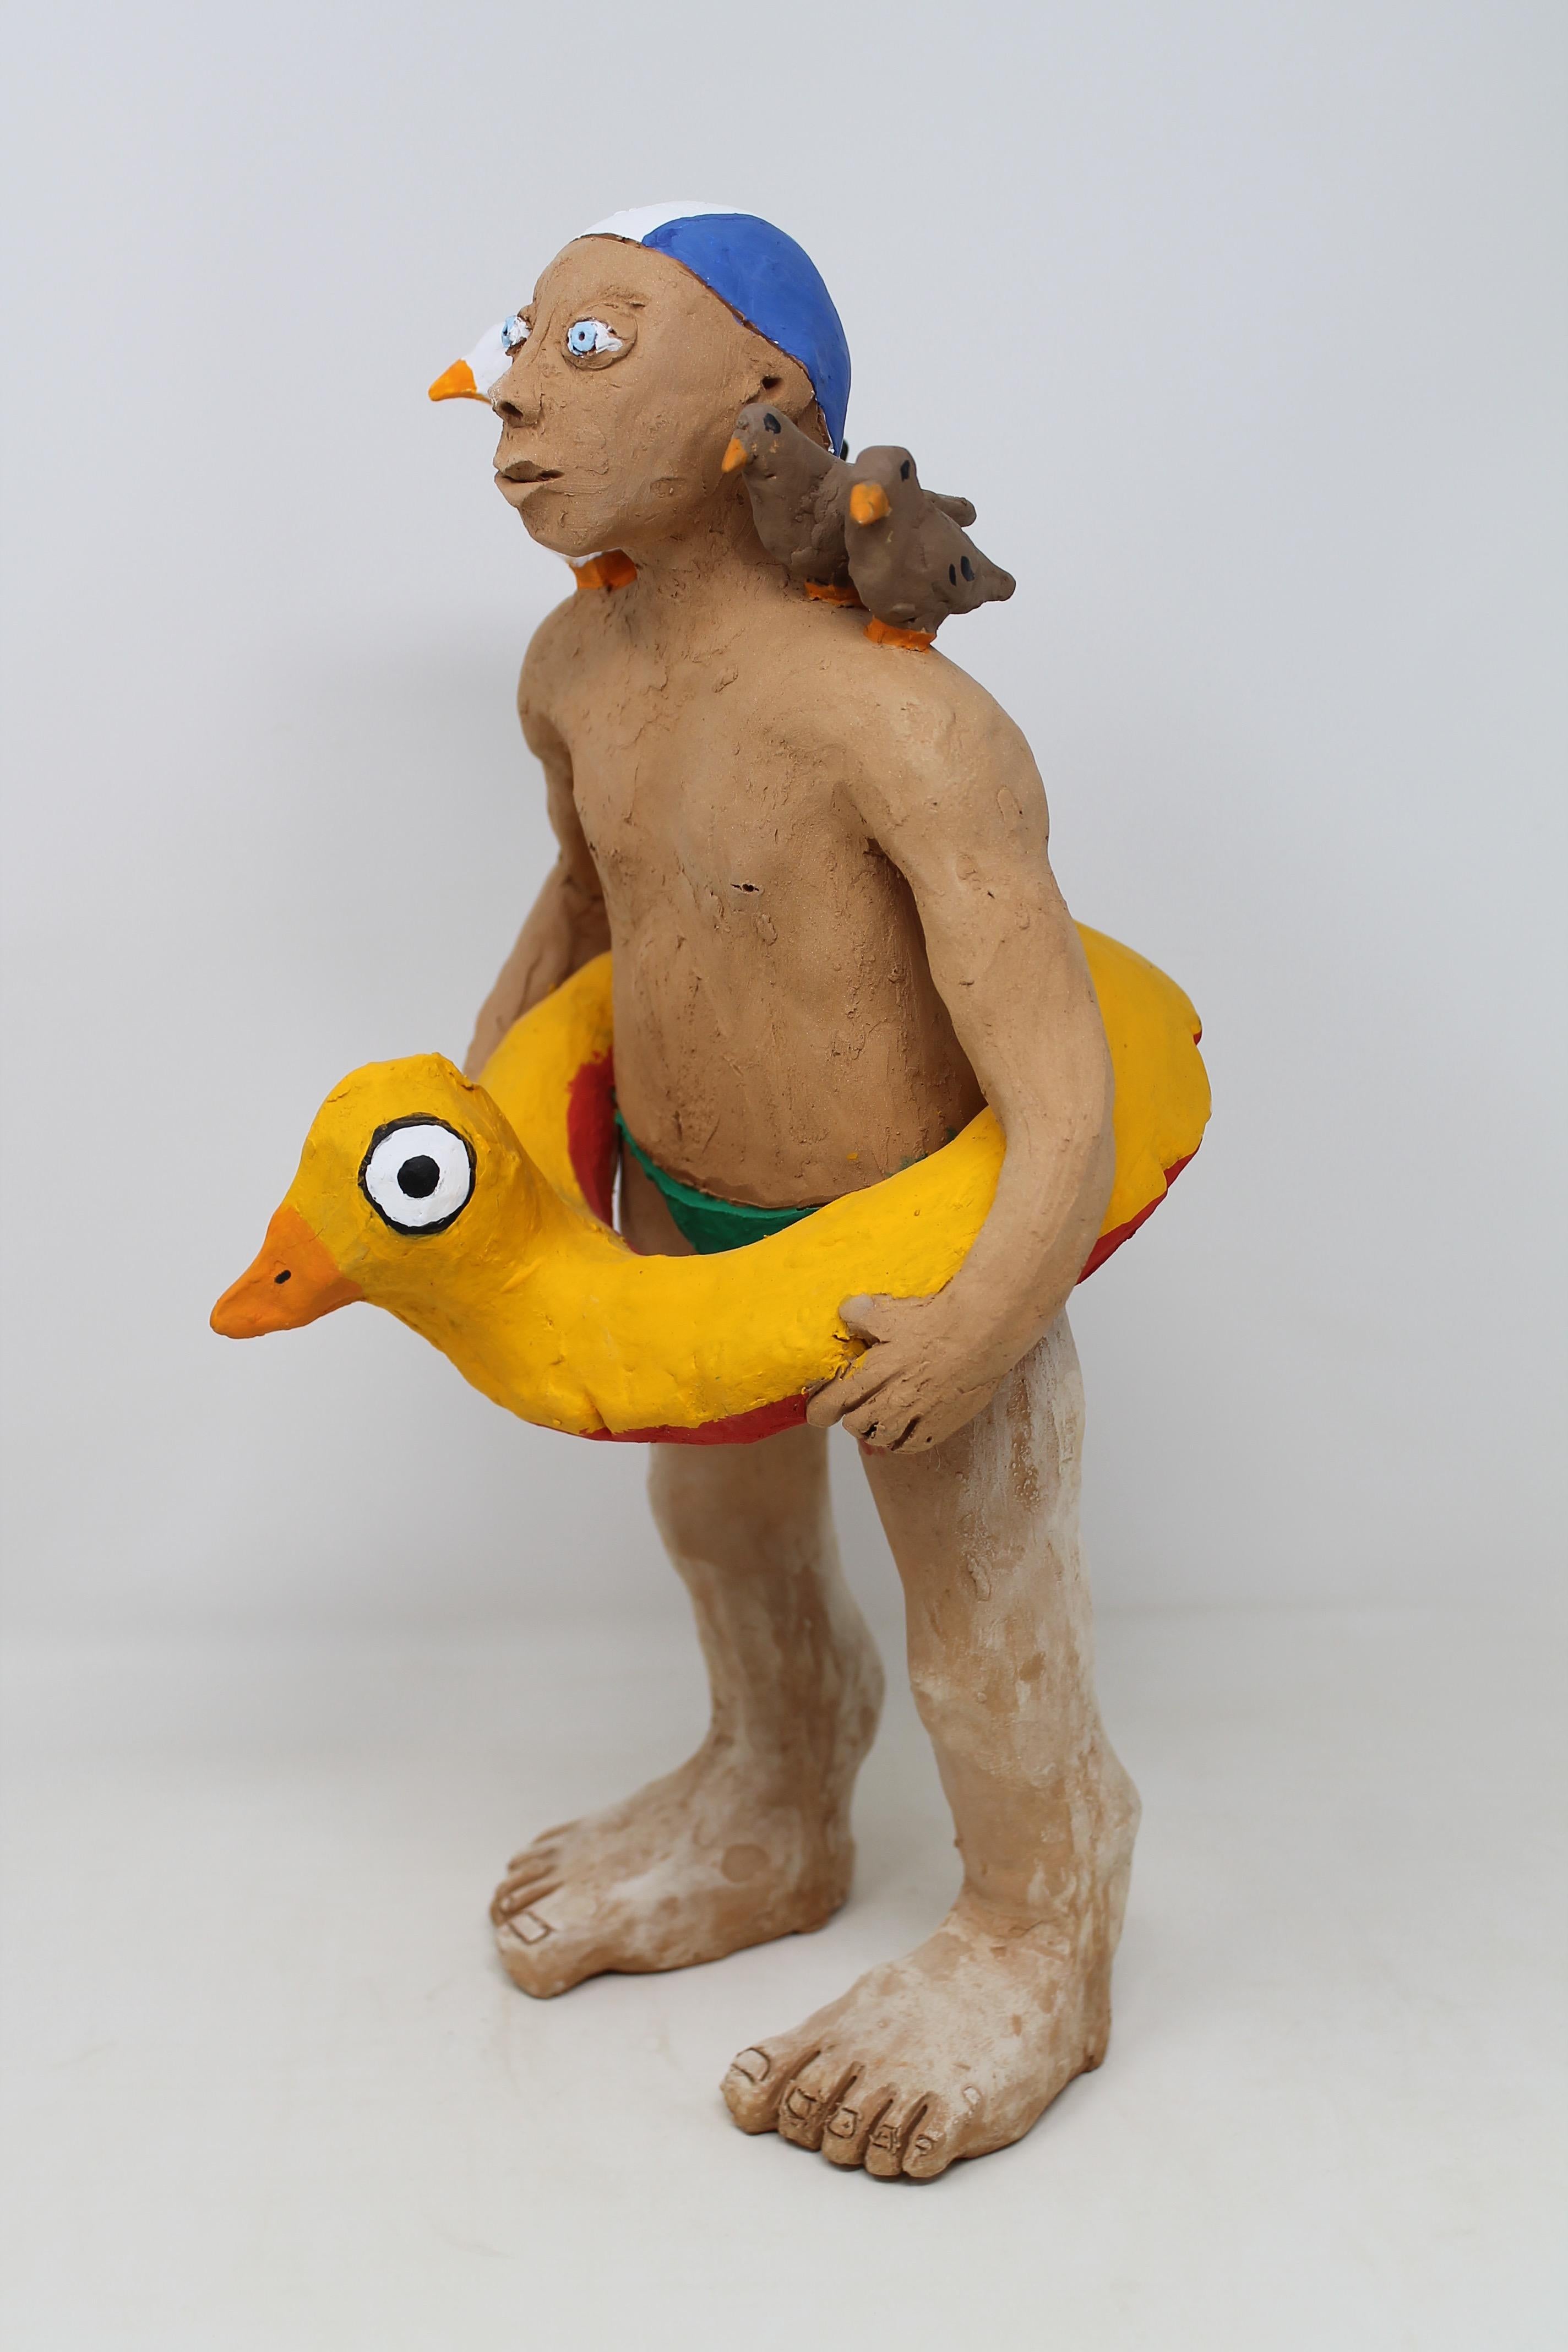 Small sculptures in terracotta. 
Starting from the clay, the piece is dried and baked in the oven at 900 degrees. Covered with acrylic colors or in majolica, 30 cm, 40 cm and 50 cm high in three sizes Human figures nicely hybridized with zoomorphic